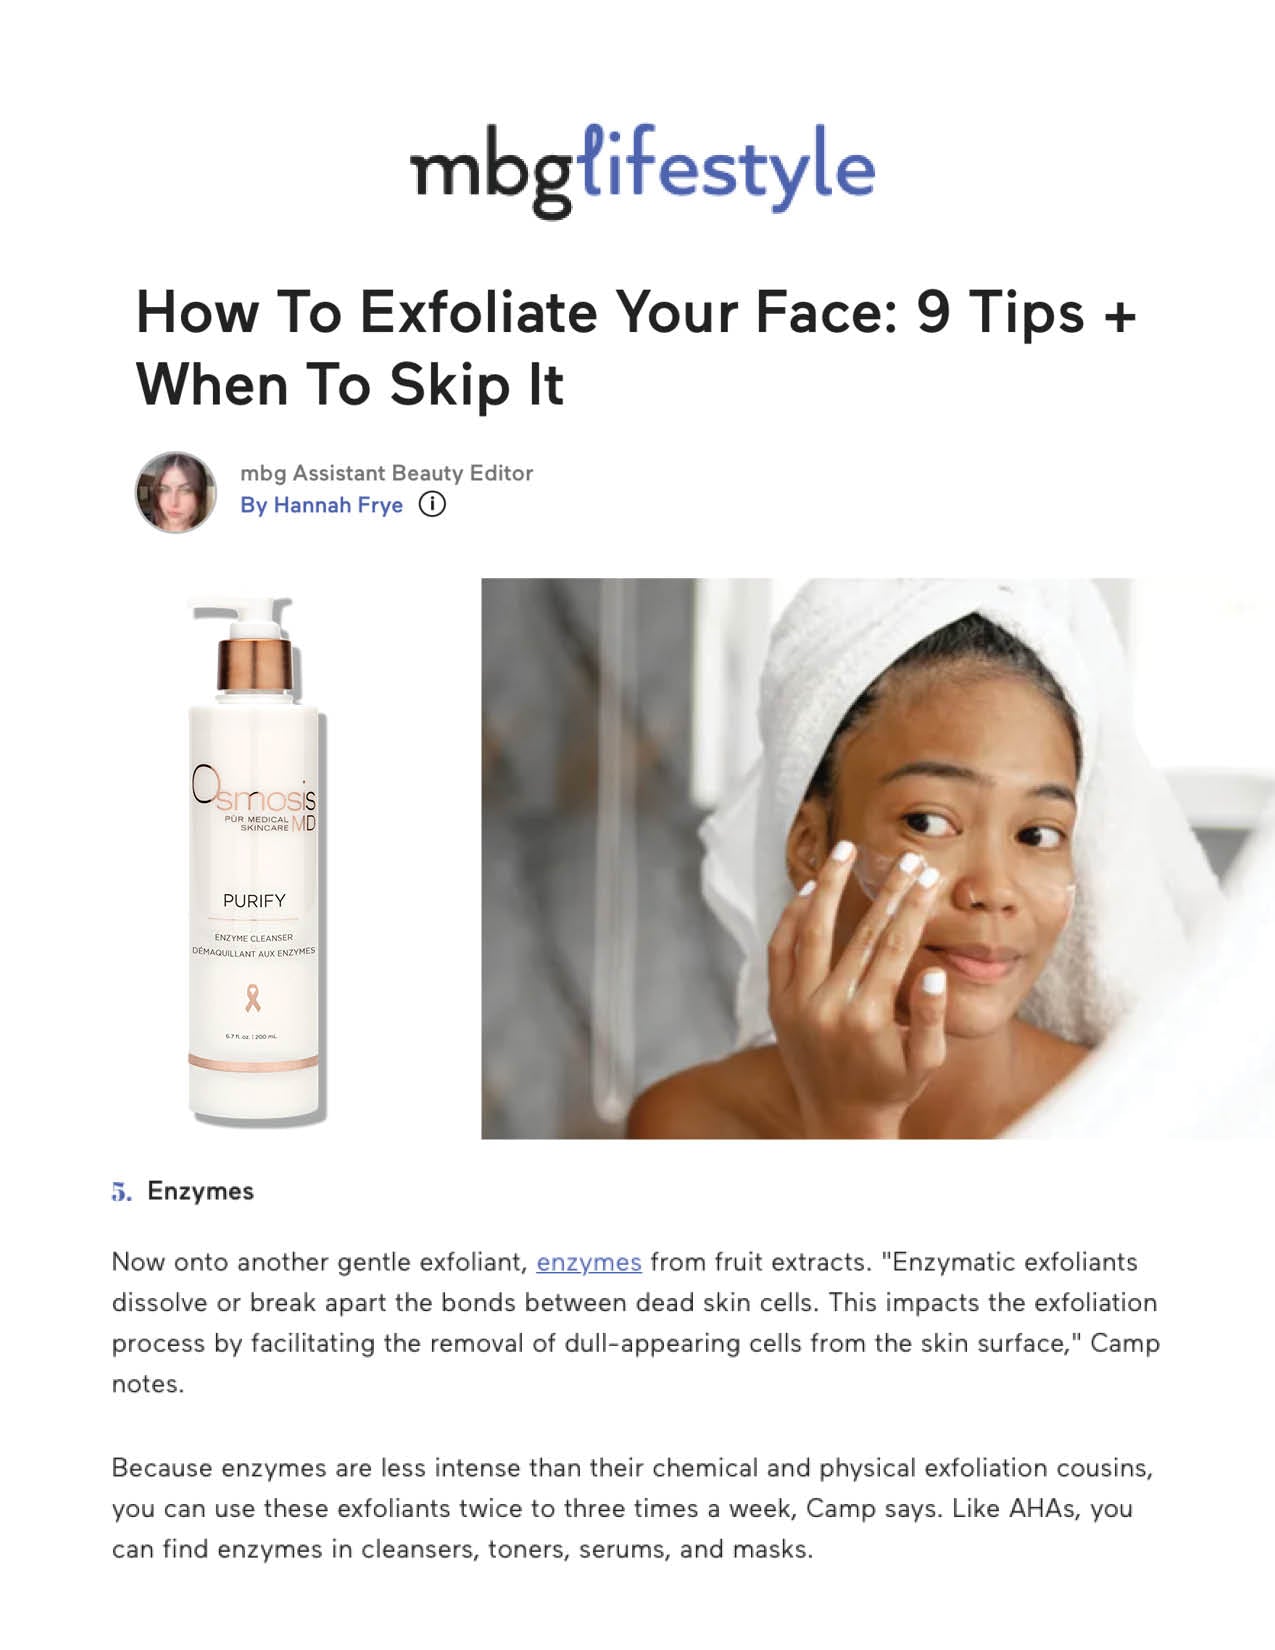 Mind Body Green featured Purify Enzyme Cleanser in their story How to Exfoliate Your Face: 9 Tips + When to Skip It